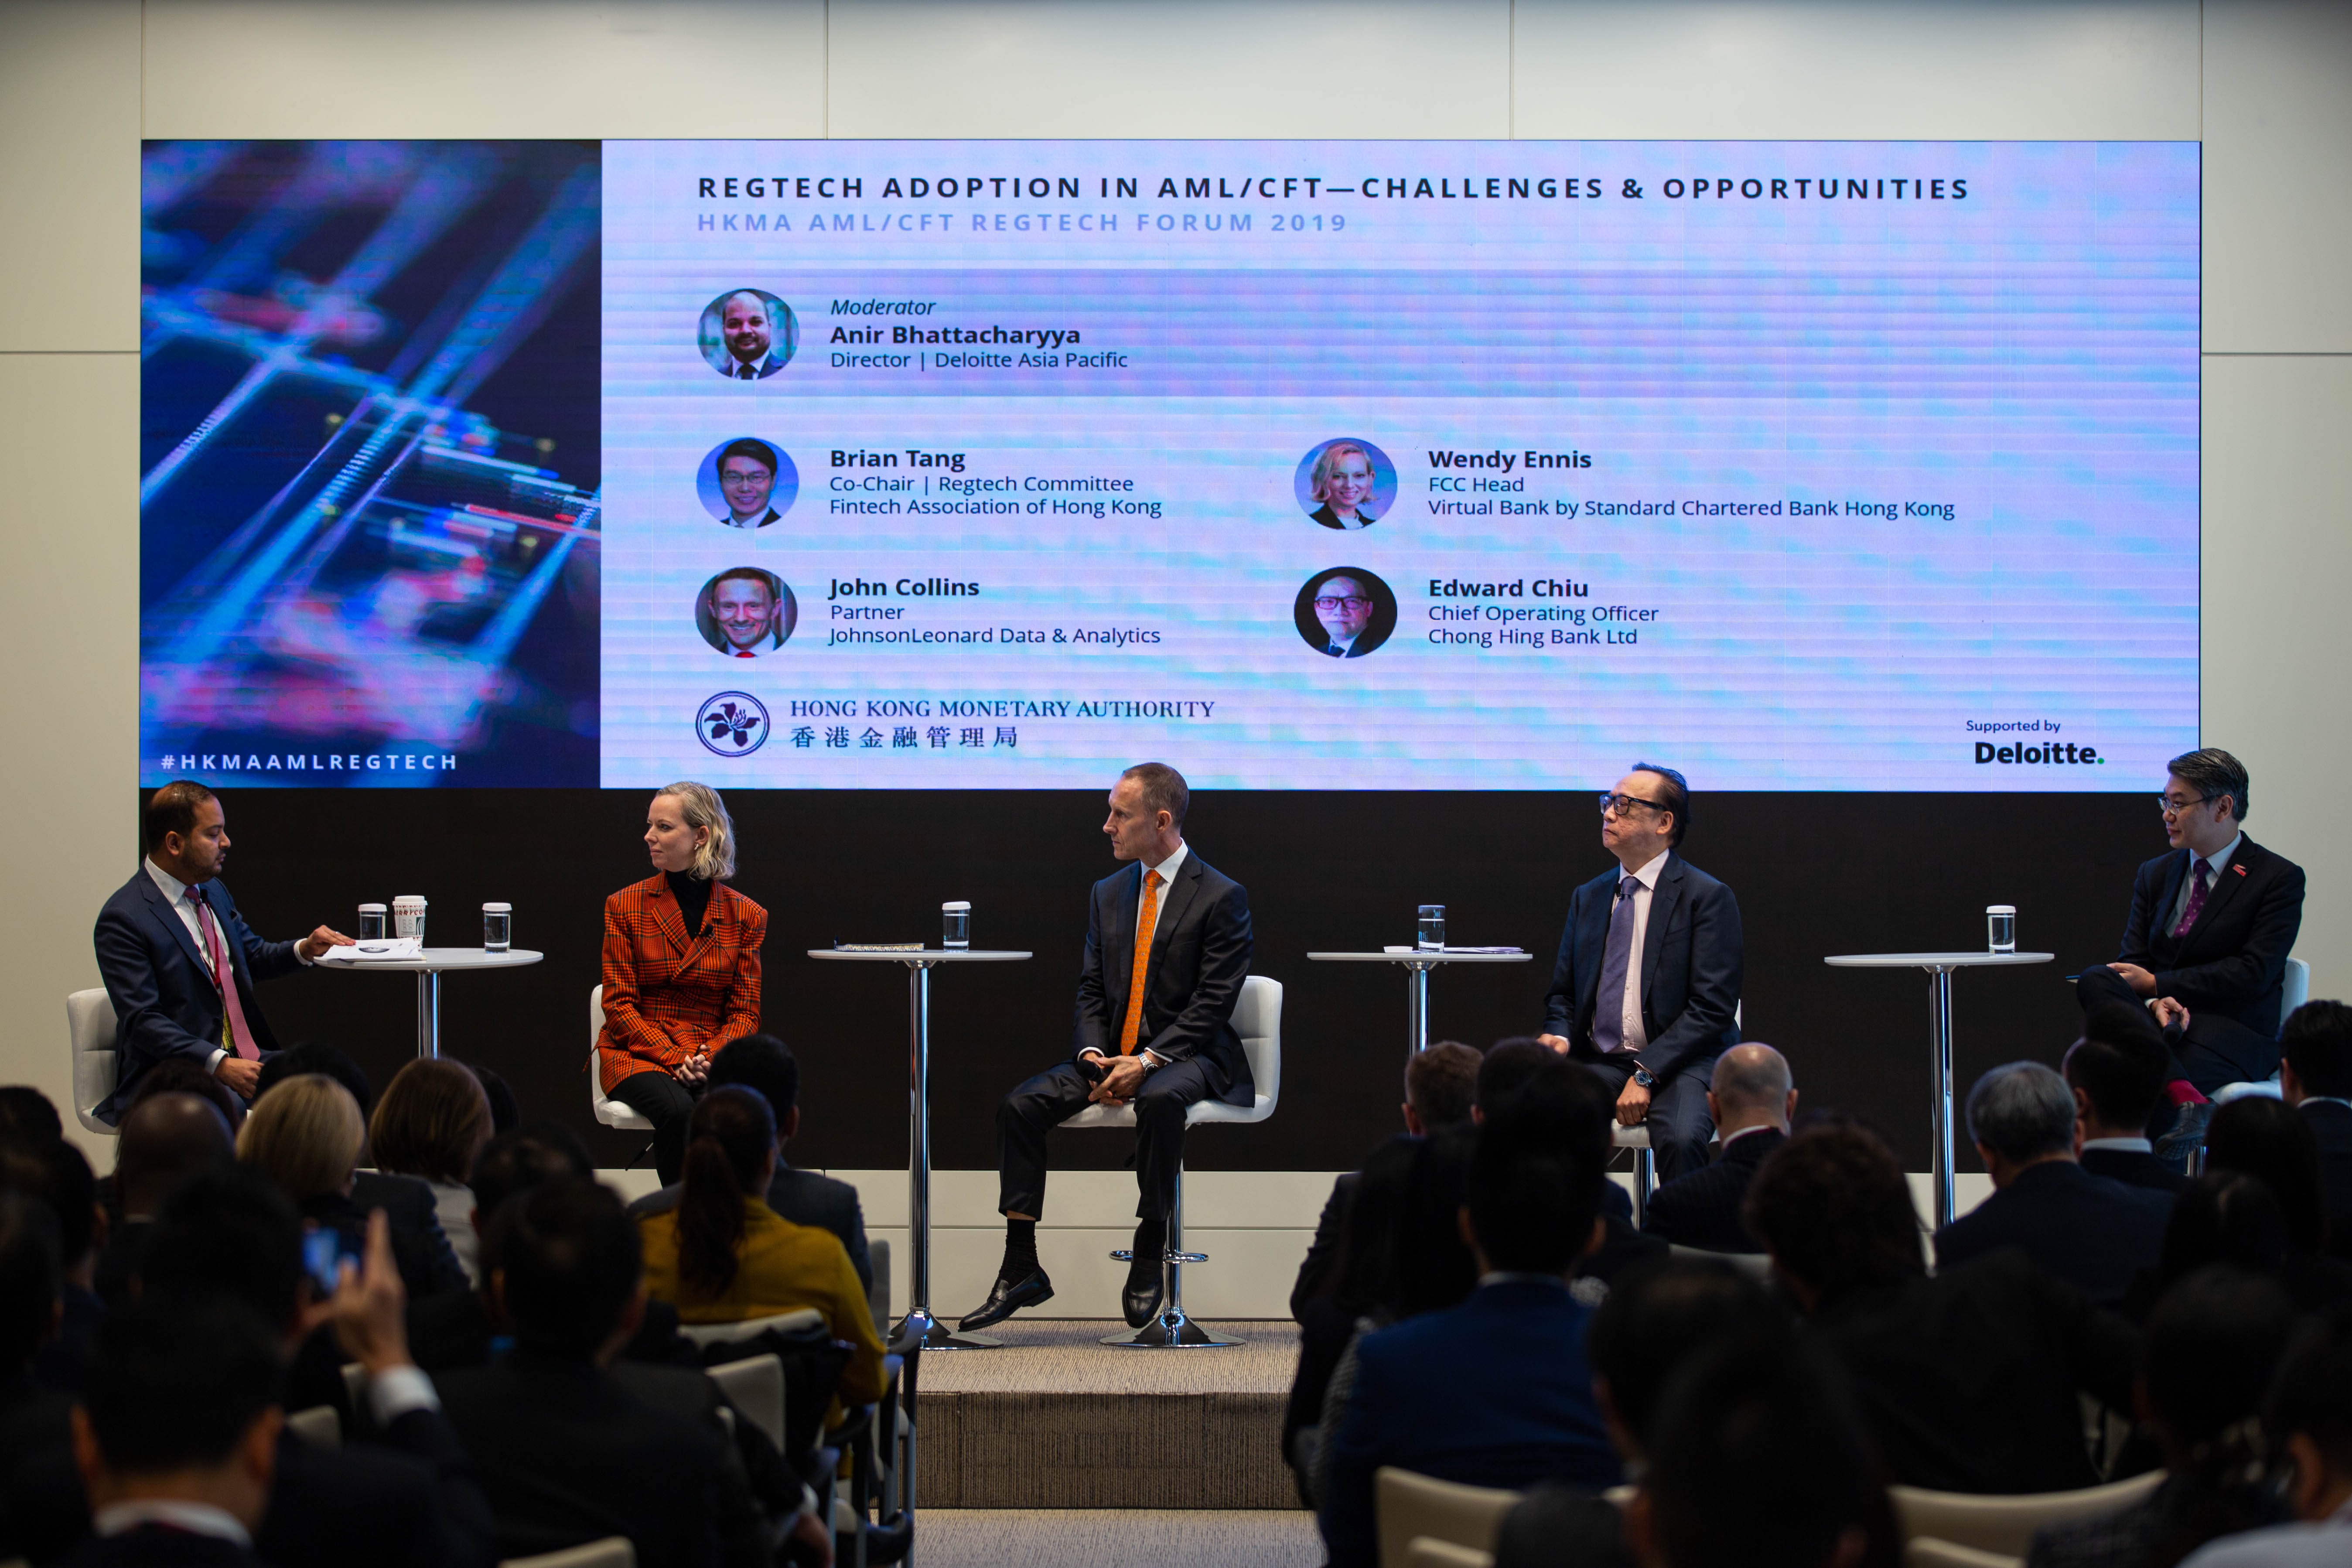 (From left to right - Panel 2) Mr Anir Bhattacharyya, Director of Deloitte; Ms Wendy Ennis, Head, Financial Crime Compliance of SC Digital Solutions Limited; Mr John Collins, Partner of JohnsonLeonard Data & Analytics; Mr Edward Chiu, Chief Operating Officer of Chong Hing Bank Limited and Mr Brian W Tang, Co-Chairman of the Fintech Association of Hong Kong’s Regtech Committee discuss challenges and opportunities in adopting RegTech in AML/CFT.